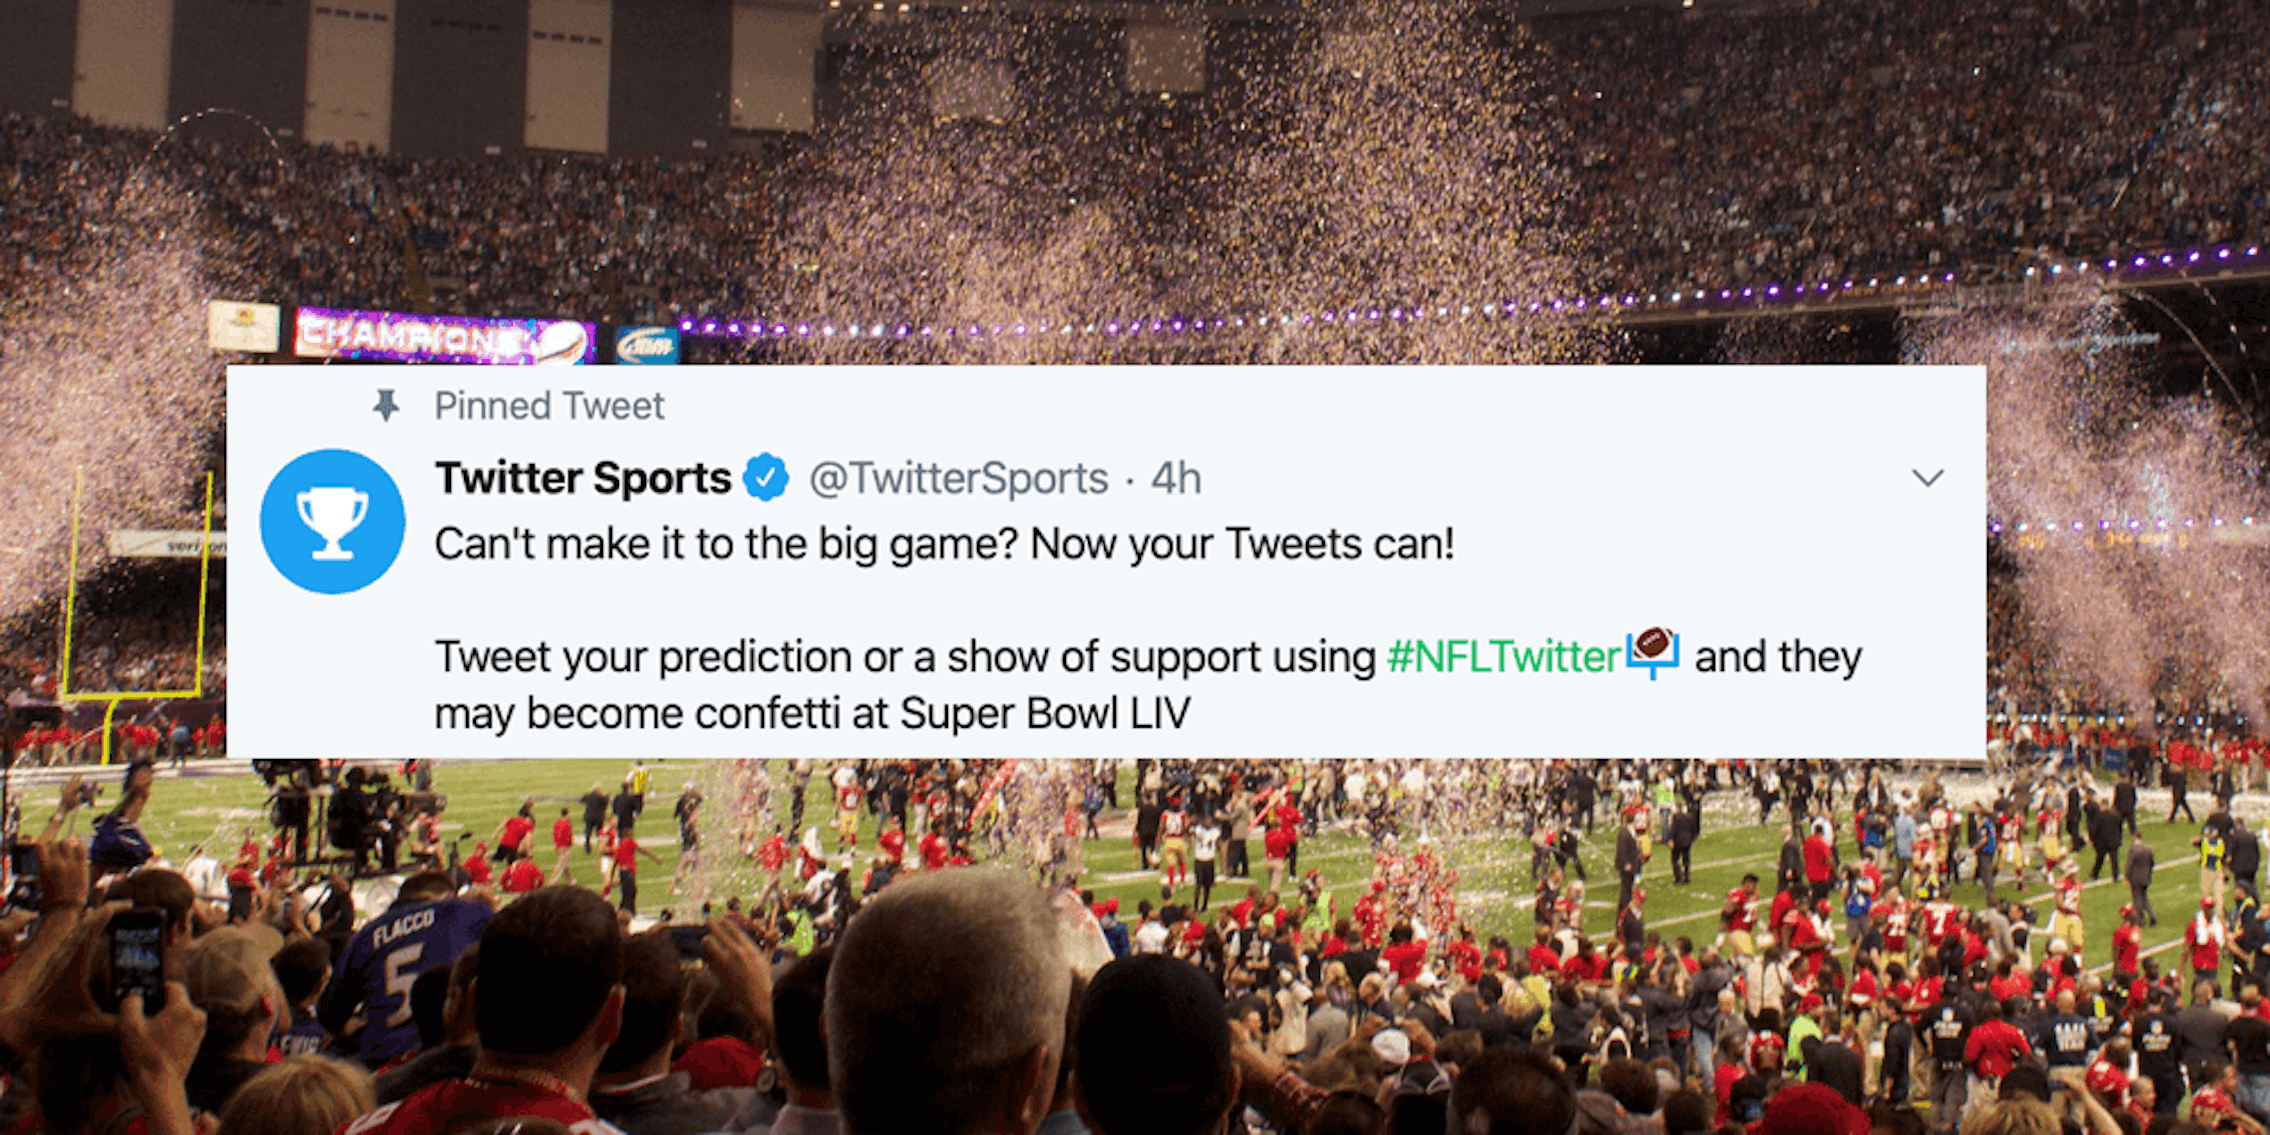 Fans' Tweets Will Be Printed on the Super Bowl Confetti